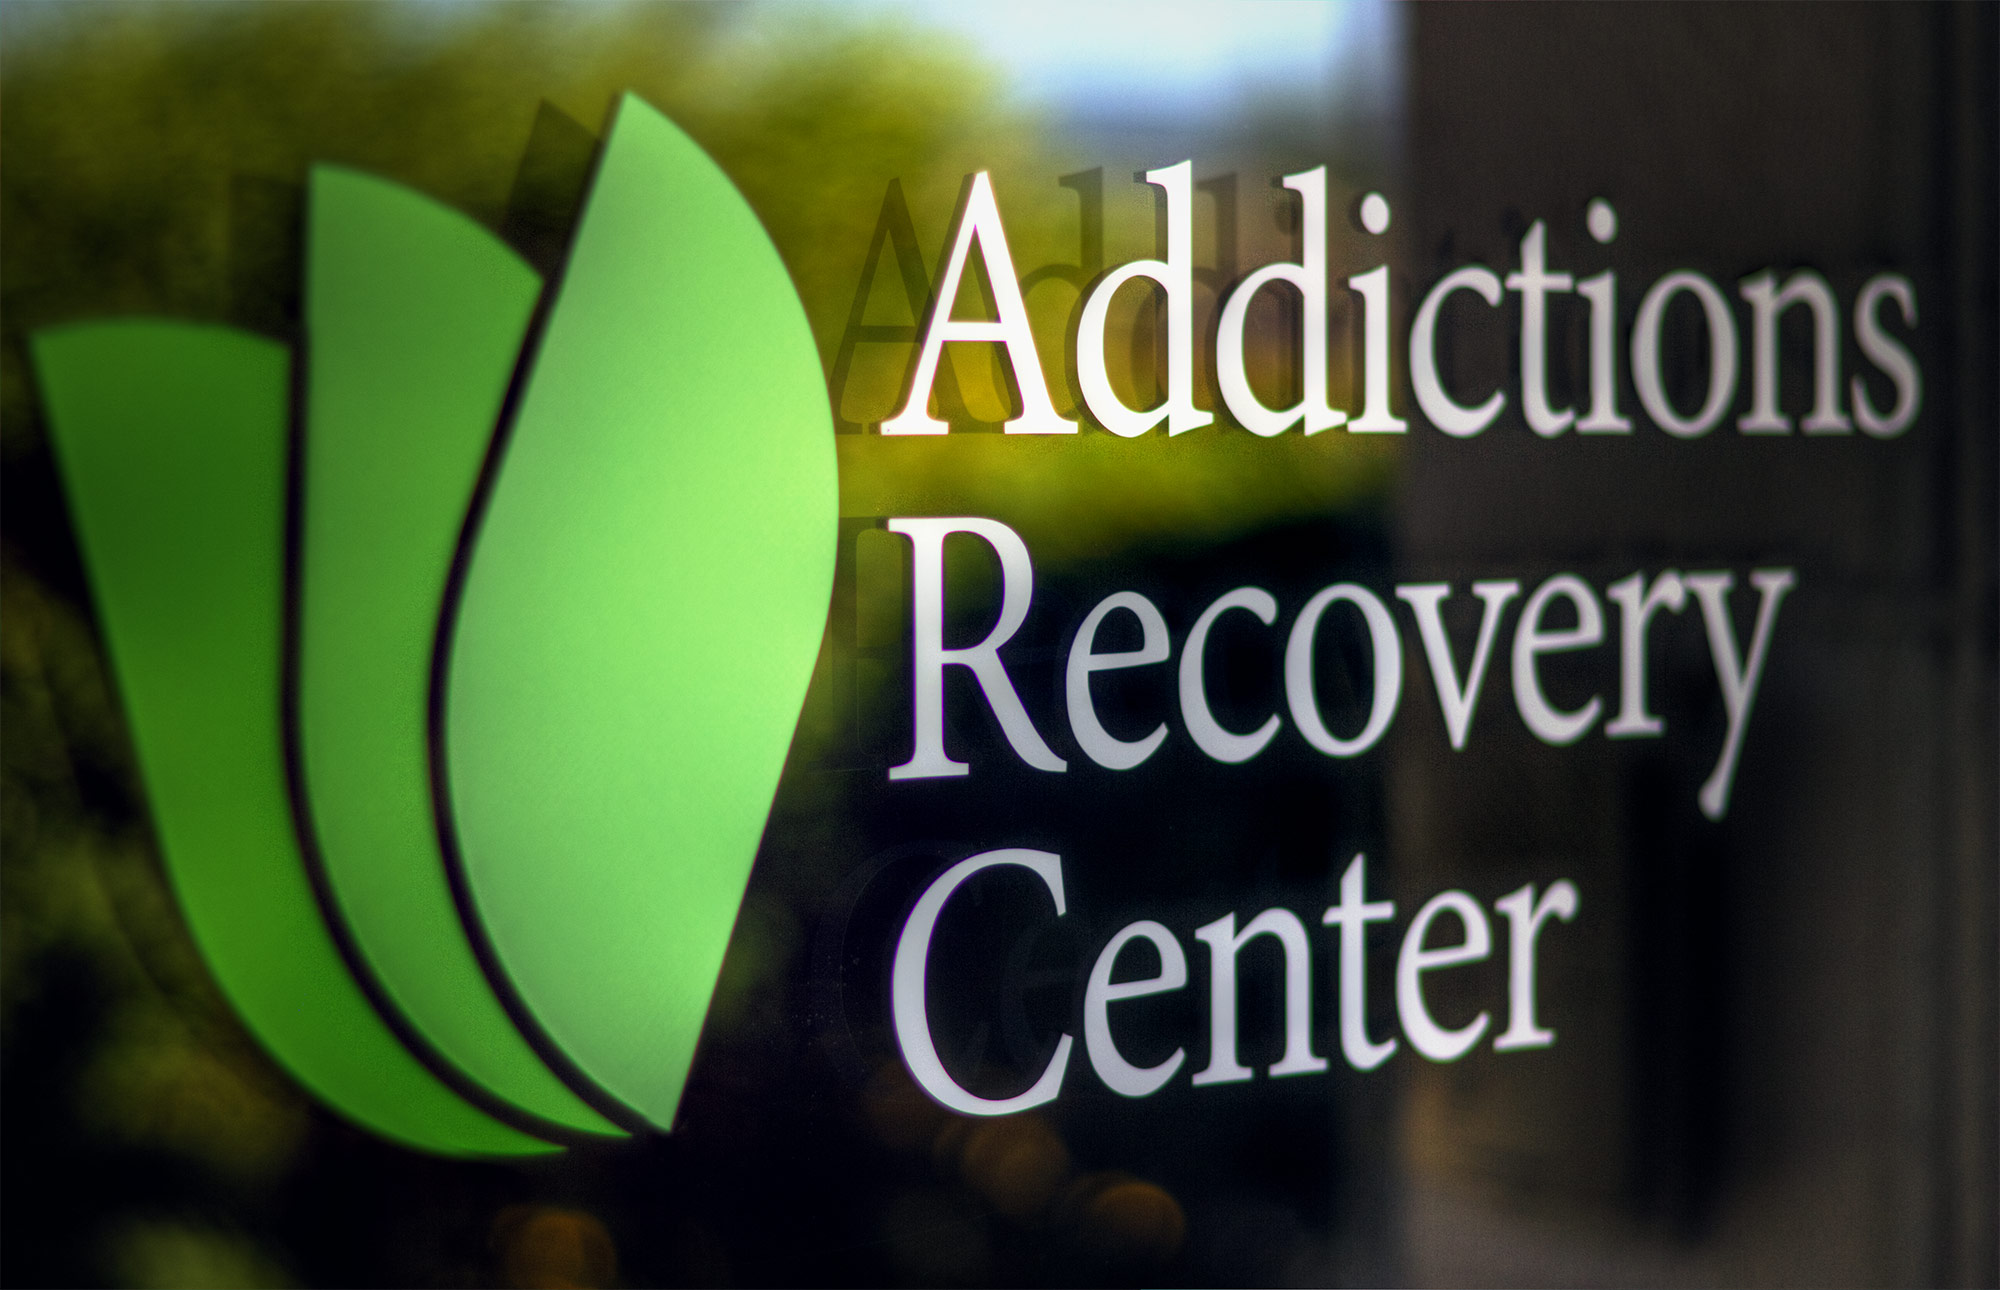 Group and Individual Counseling – Addictions Recovery Center